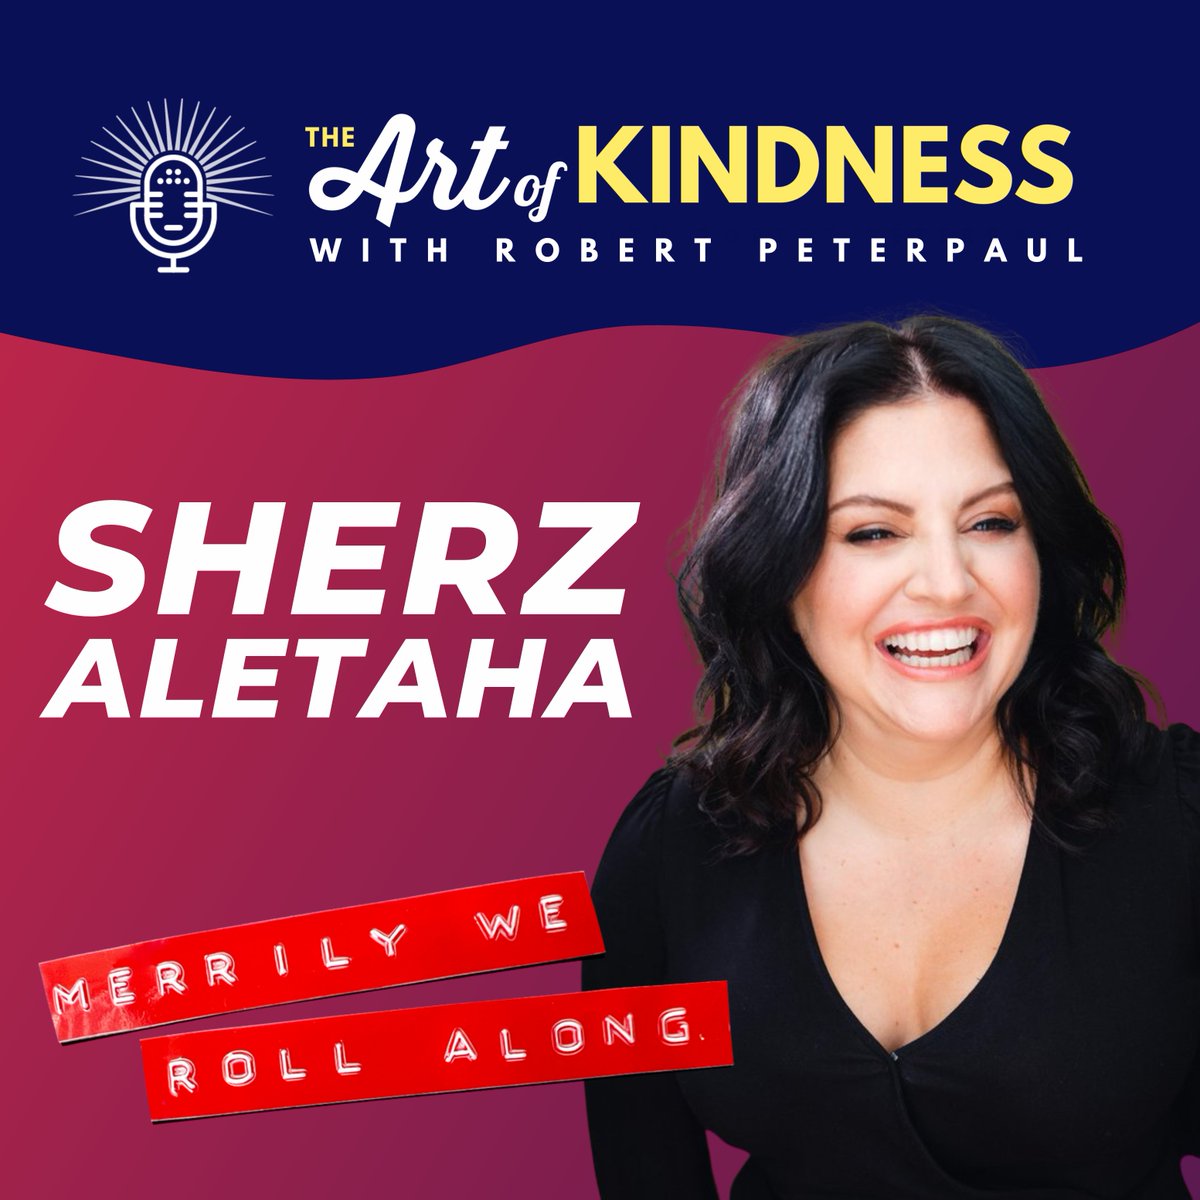 Sherz shares! Roll into this week with Broadway's Sherz Aletaha on The Art of Kindness podcast during the ECLIPSE, as she chats: 🎭 @MerrilyOnBway 🤩 meeting Meryl Streep ❤️ bringing her authentic self to roles Tune in now wherever you listen 🎙️ bpn.fm/TheArtOfKindne…